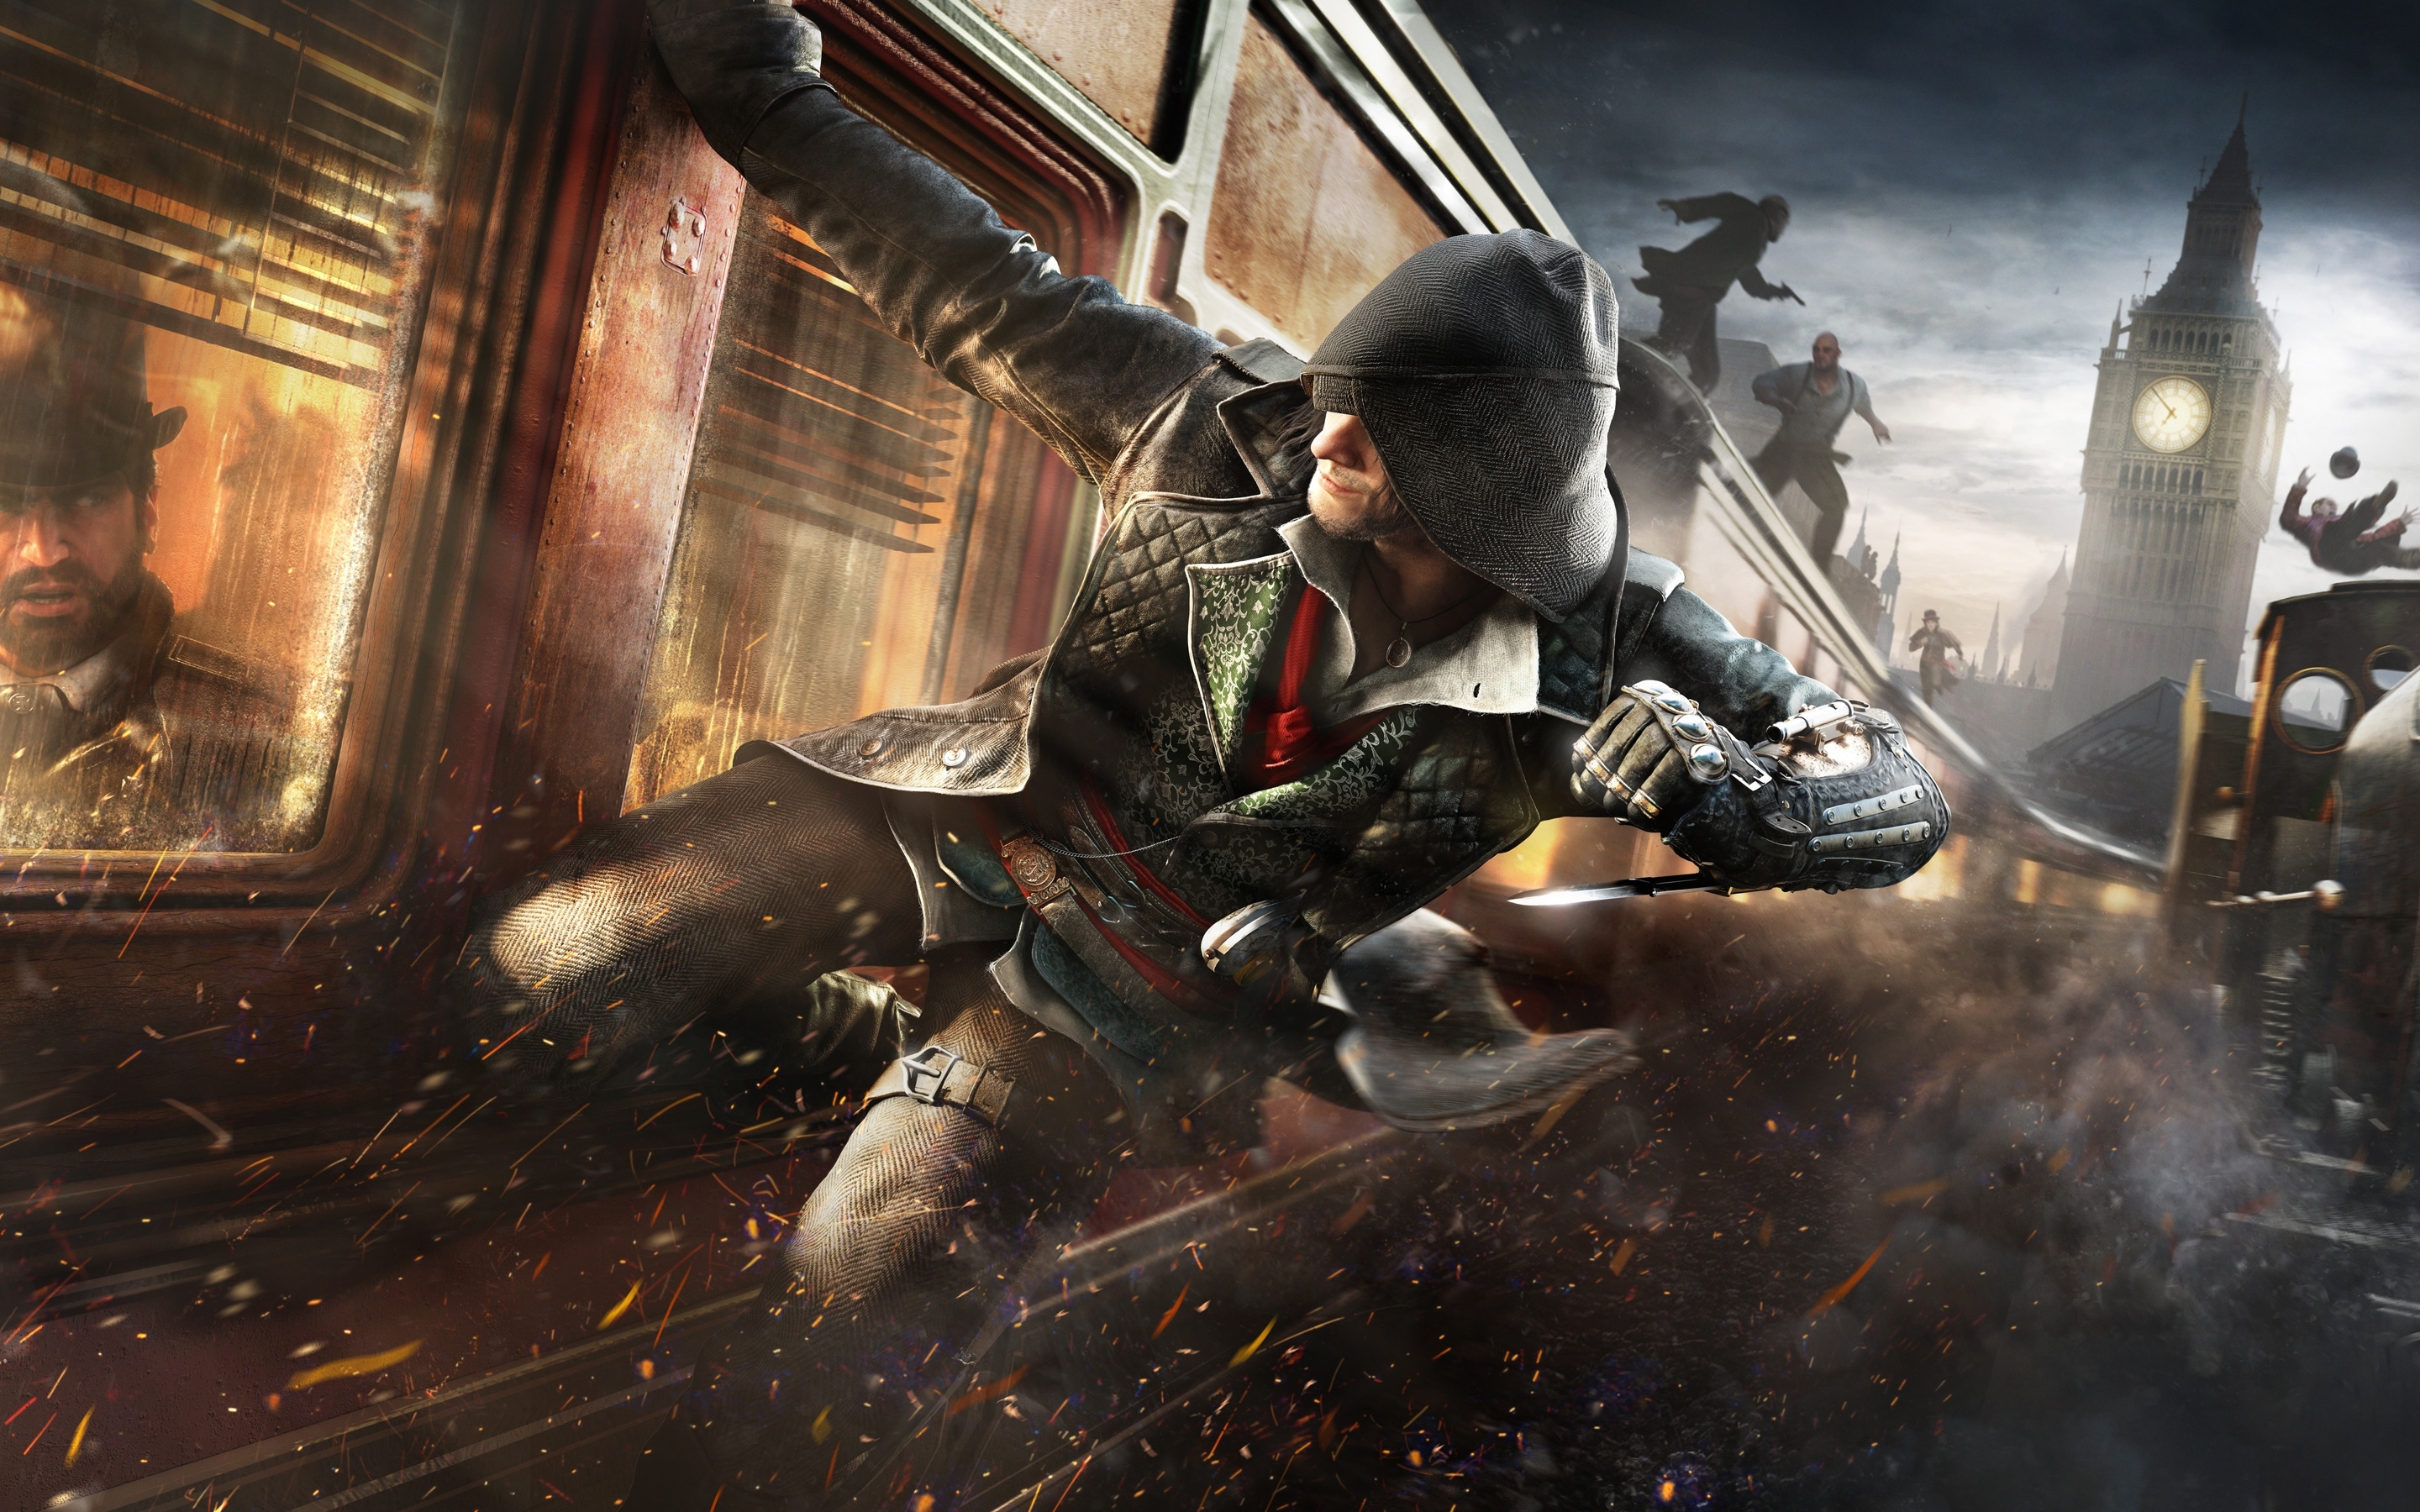 10 Top Assassin's Creed Syndicate Wallpaper Hd FULL HD 1920×1080 For PC Desktop